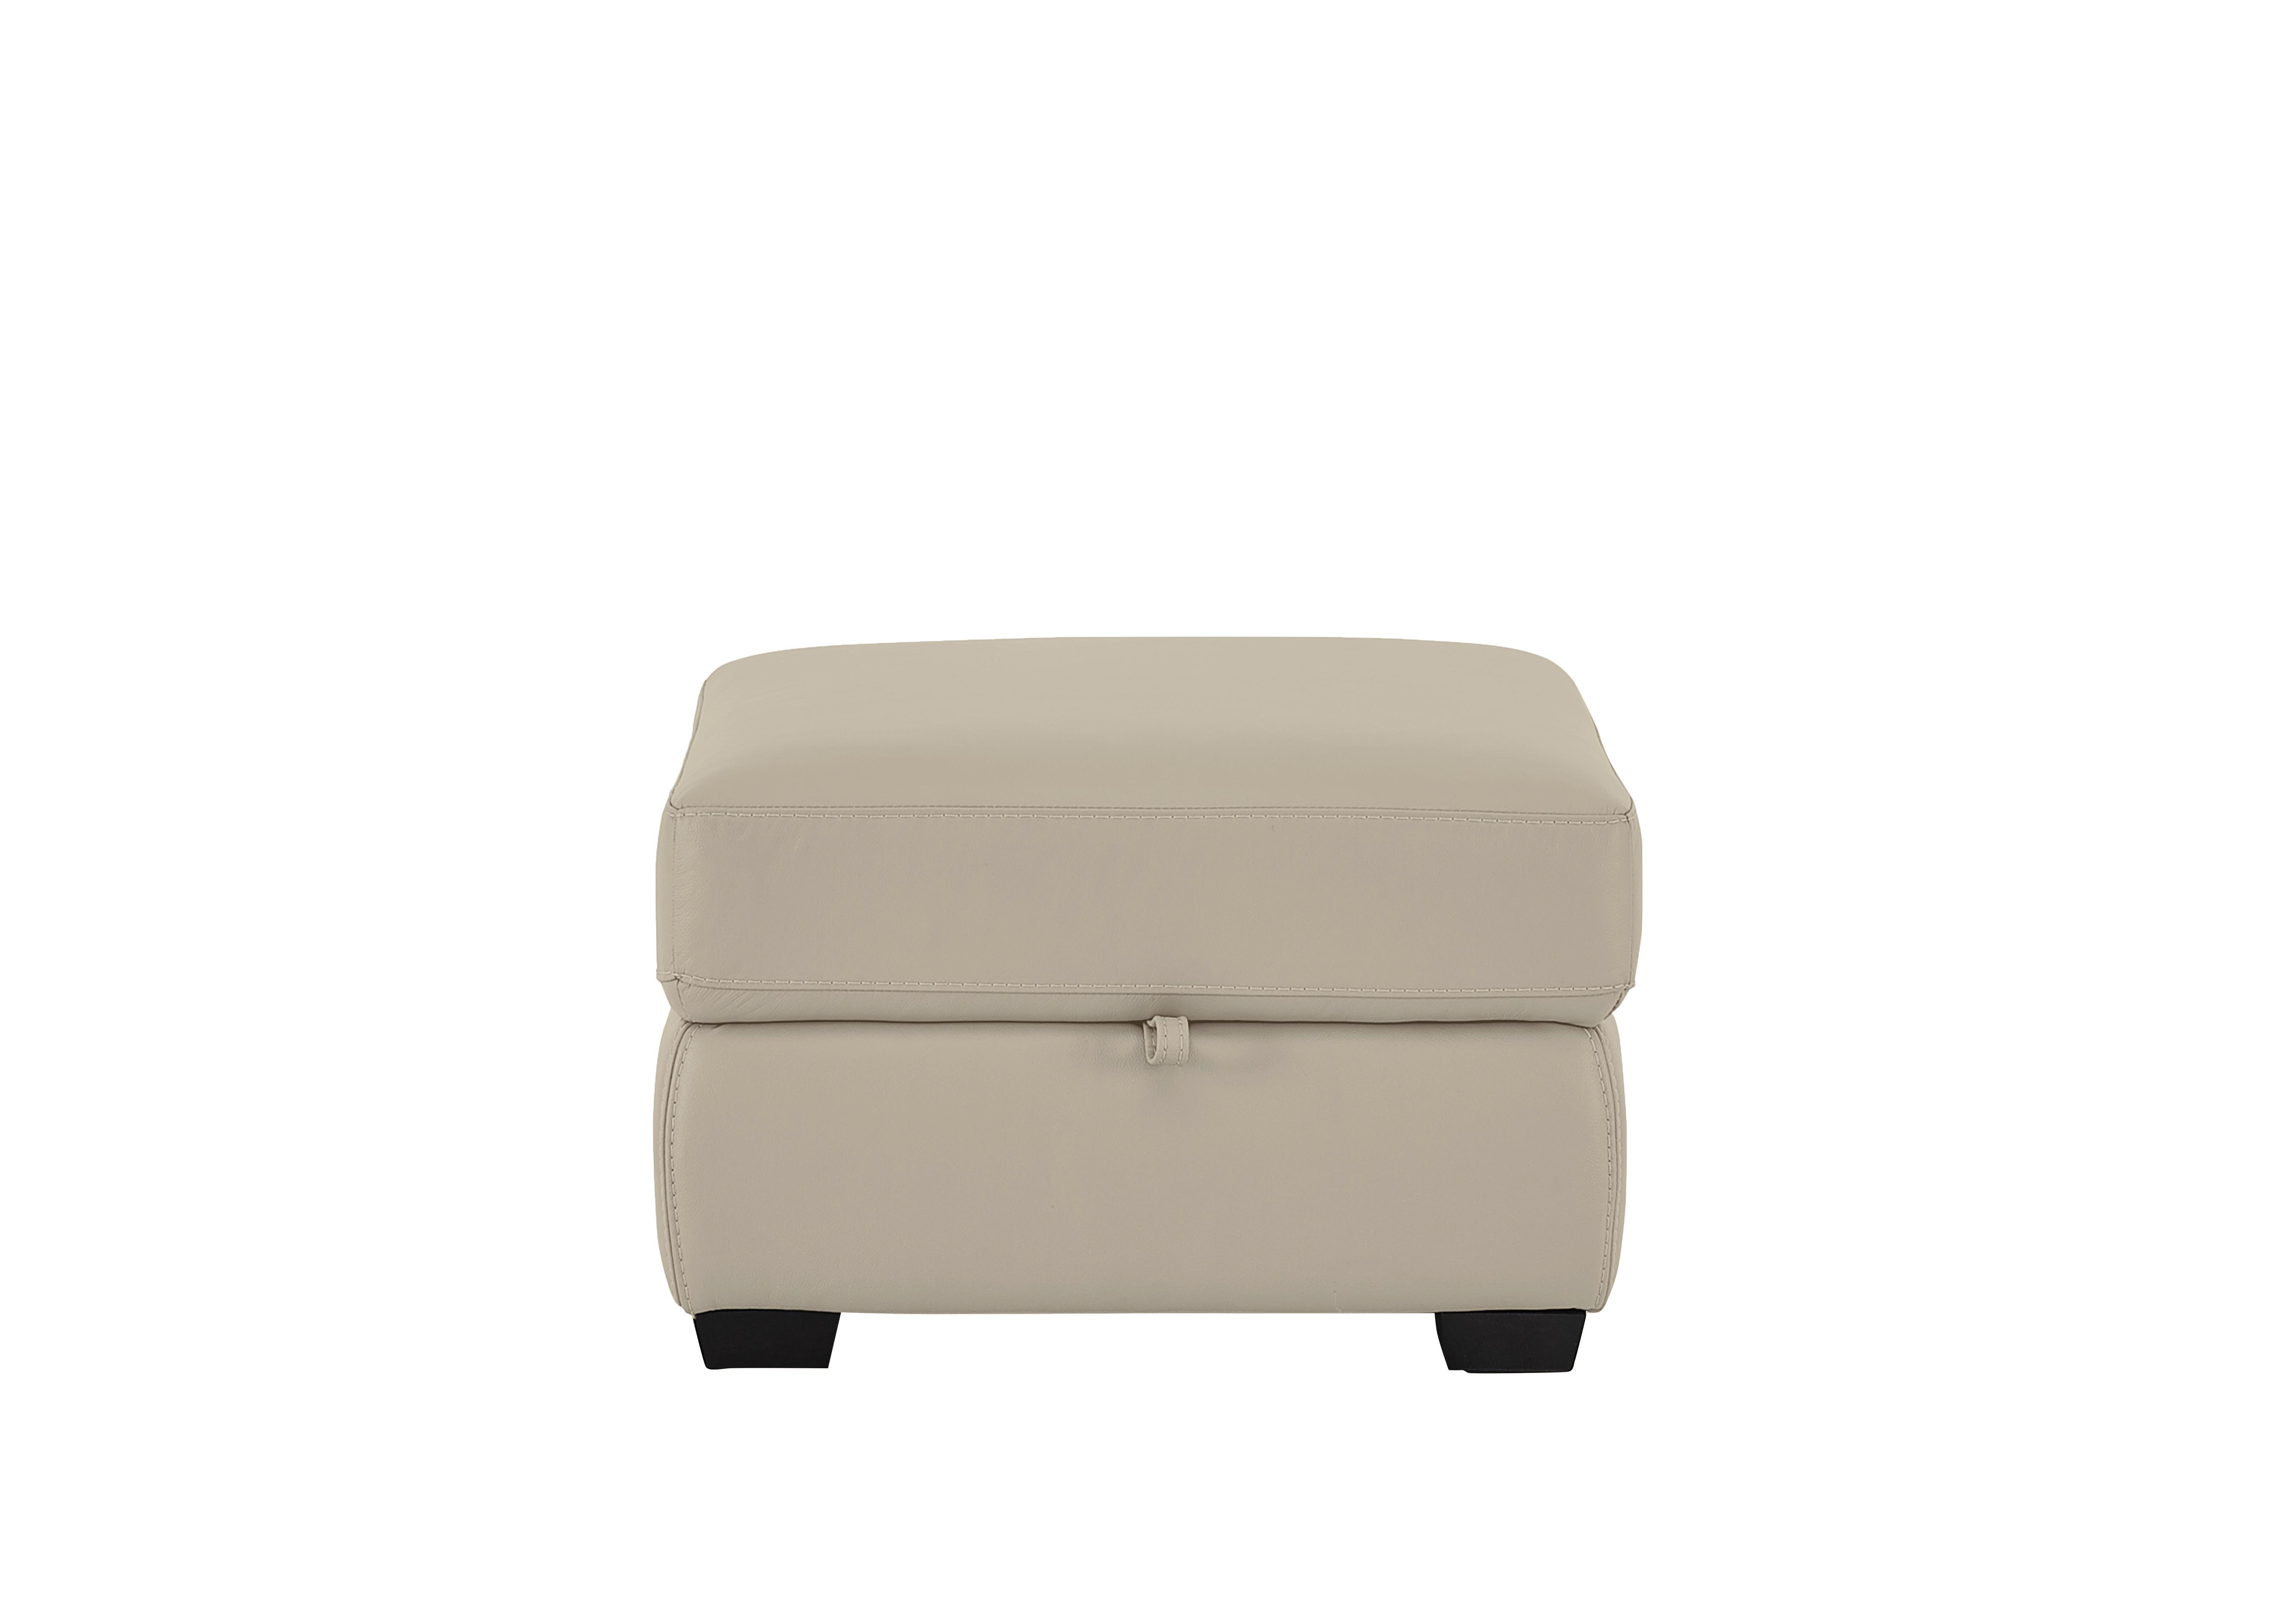 Compact Collection Petit Leather Storage Footstool in Bv-041e Dapple Grey on Furniture Village